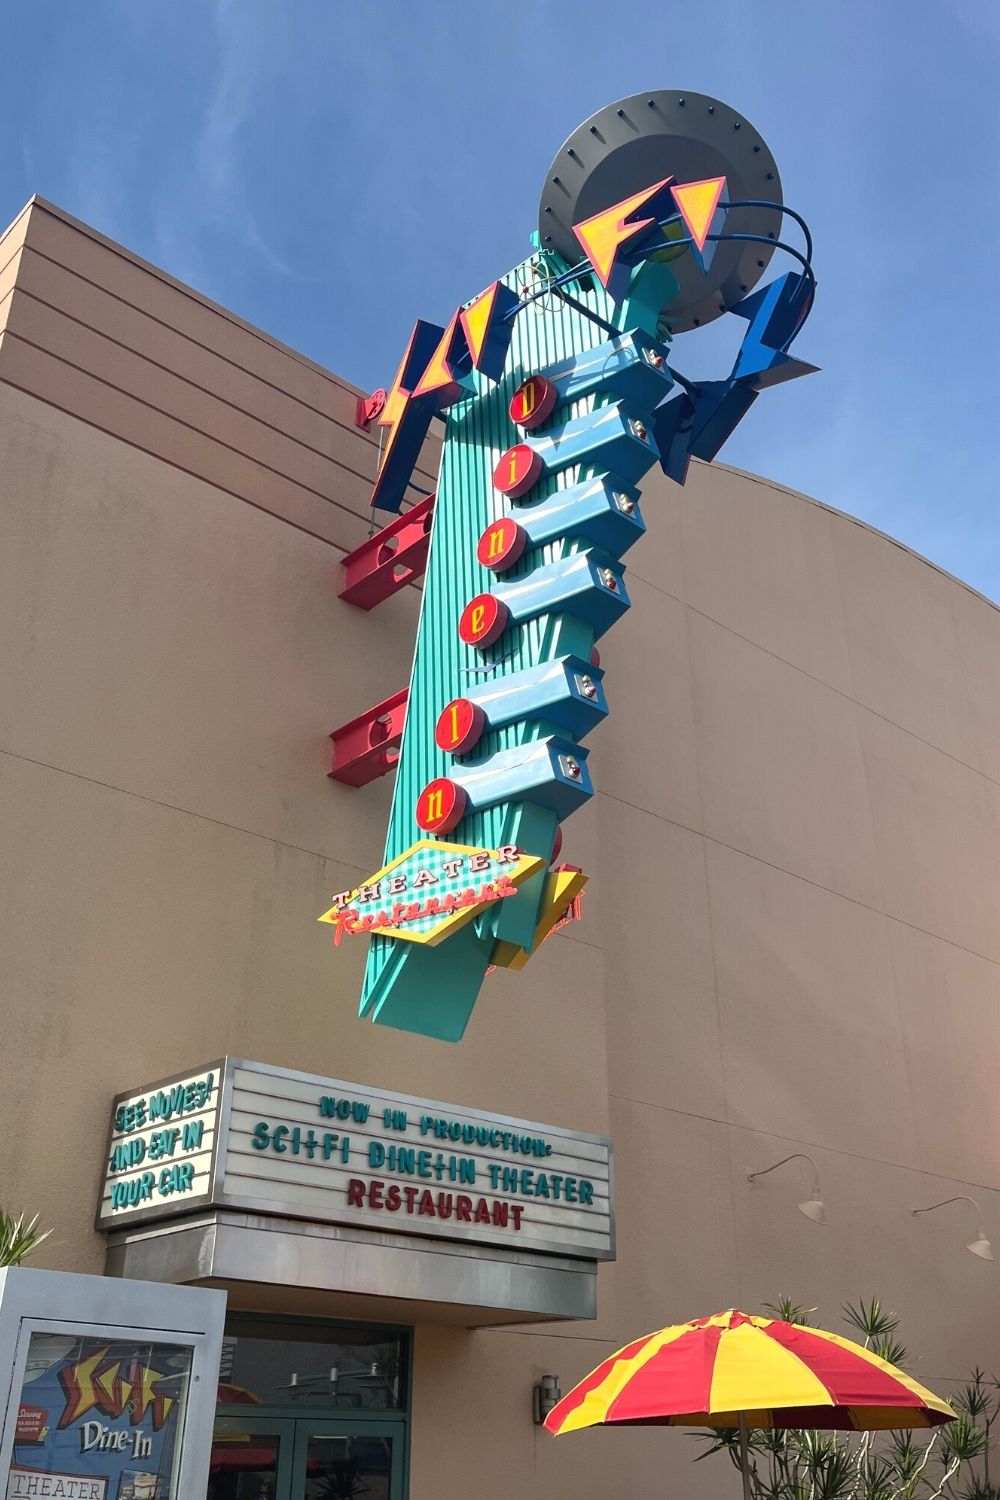 Sci-Fi Dine-In Theater restaurant at Disney's Hollywood Studios, which serves items many picky eaters would enjoy